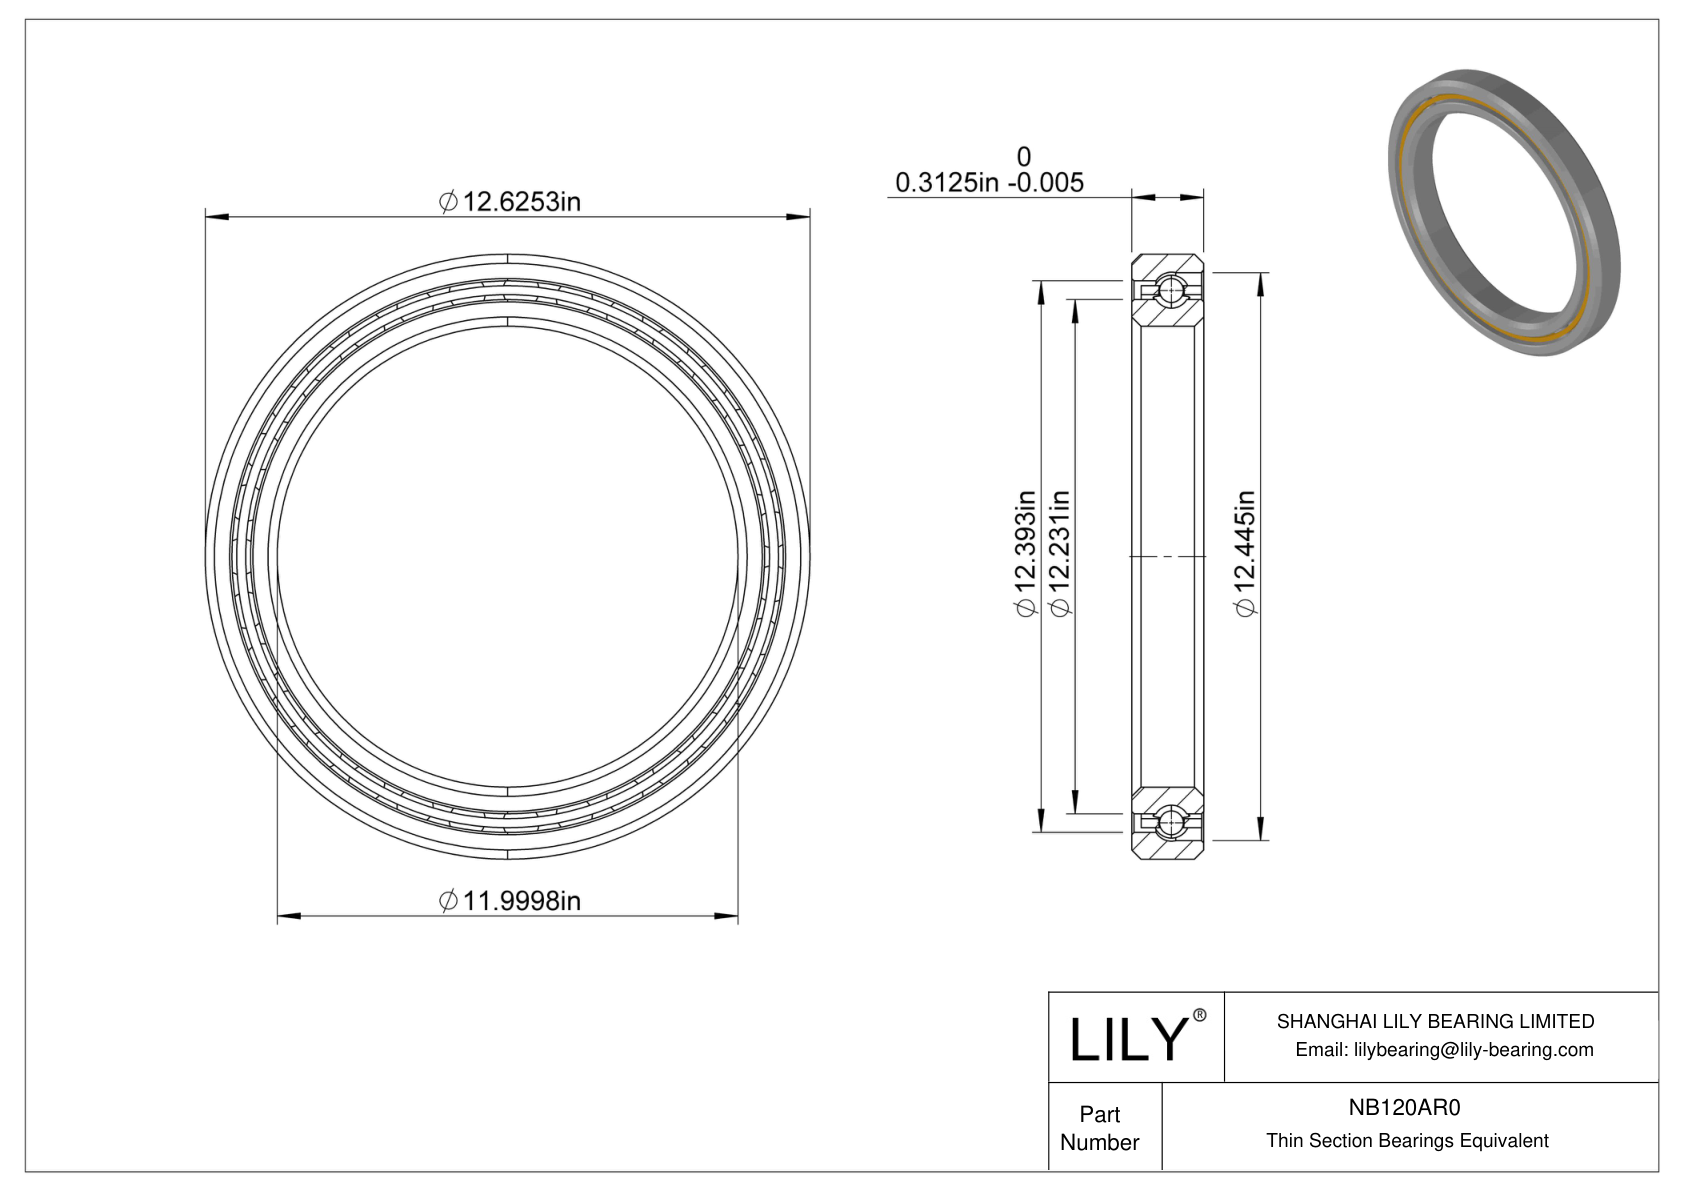 NB120AR0 Constant Section (CS) Bearings cad drawing